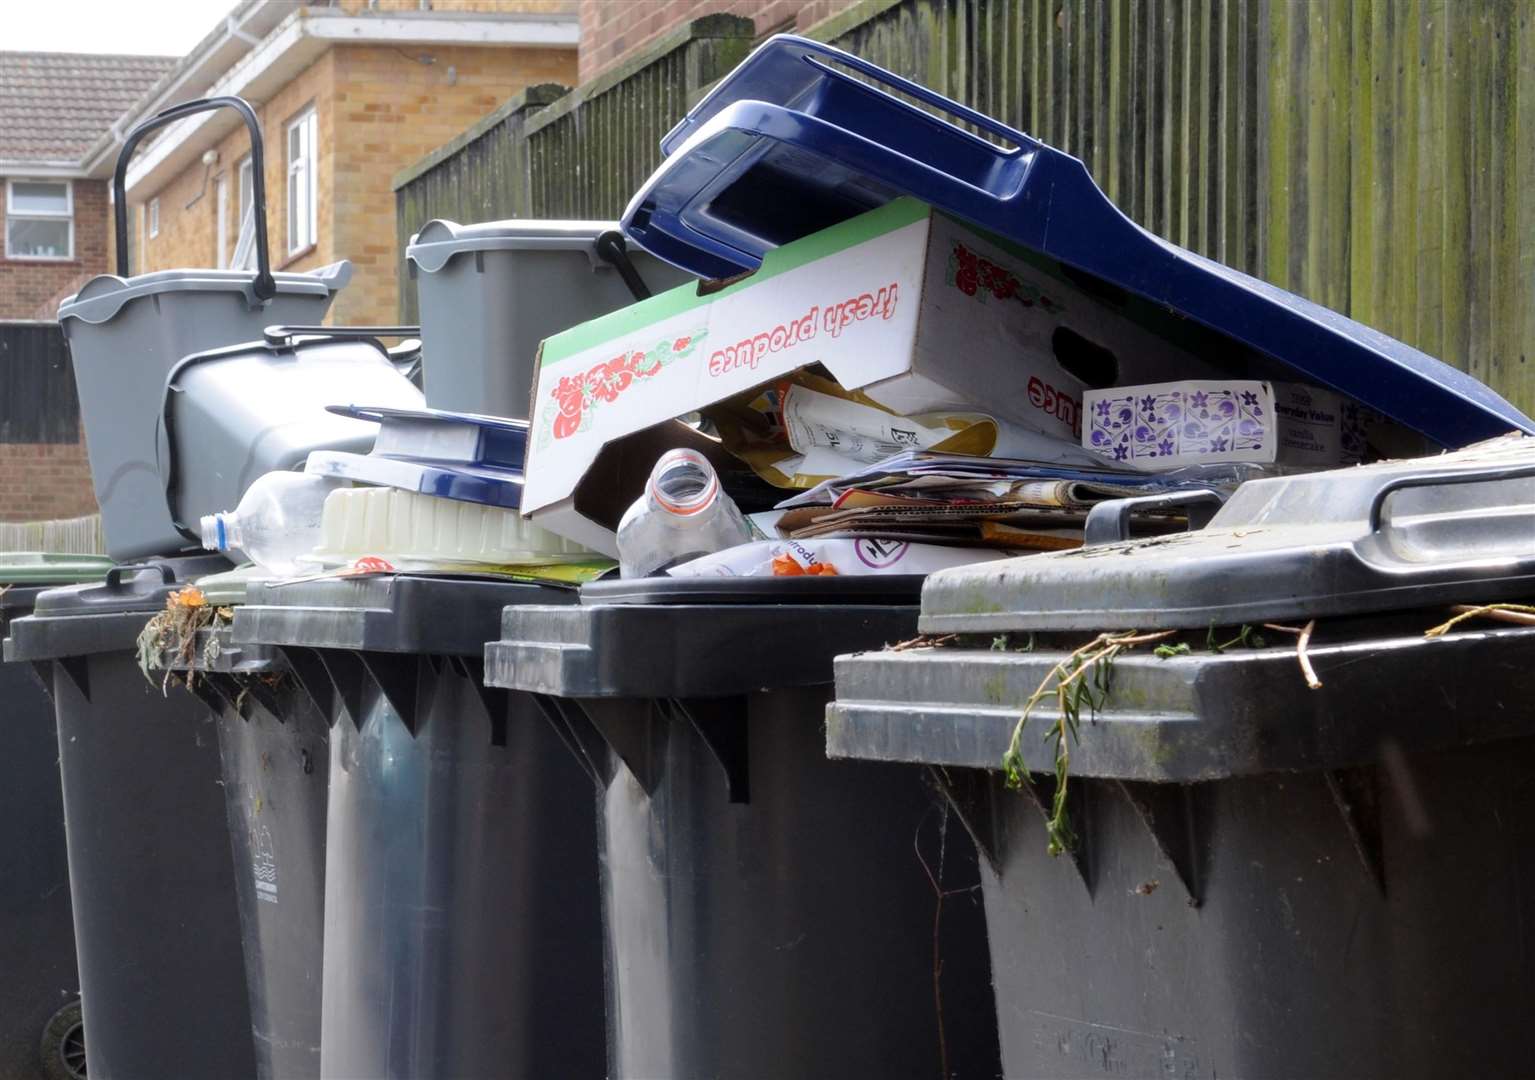 'Rigorous' checks on recycling bins as council warns they'll go unemptied 